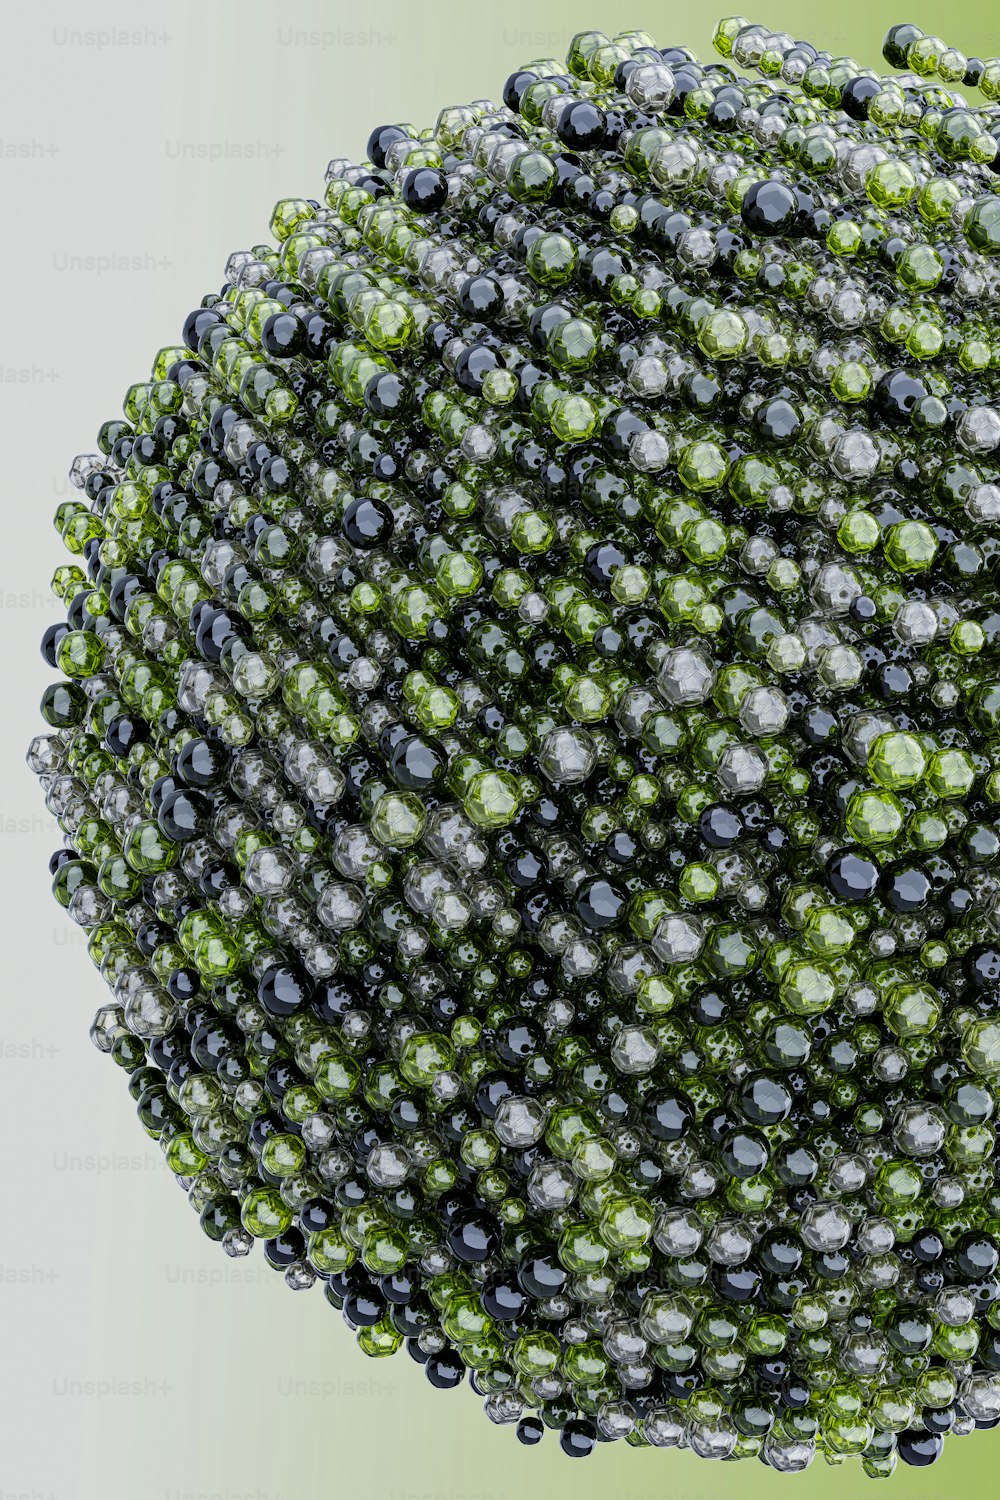 a close up of a ball of beads on a green background